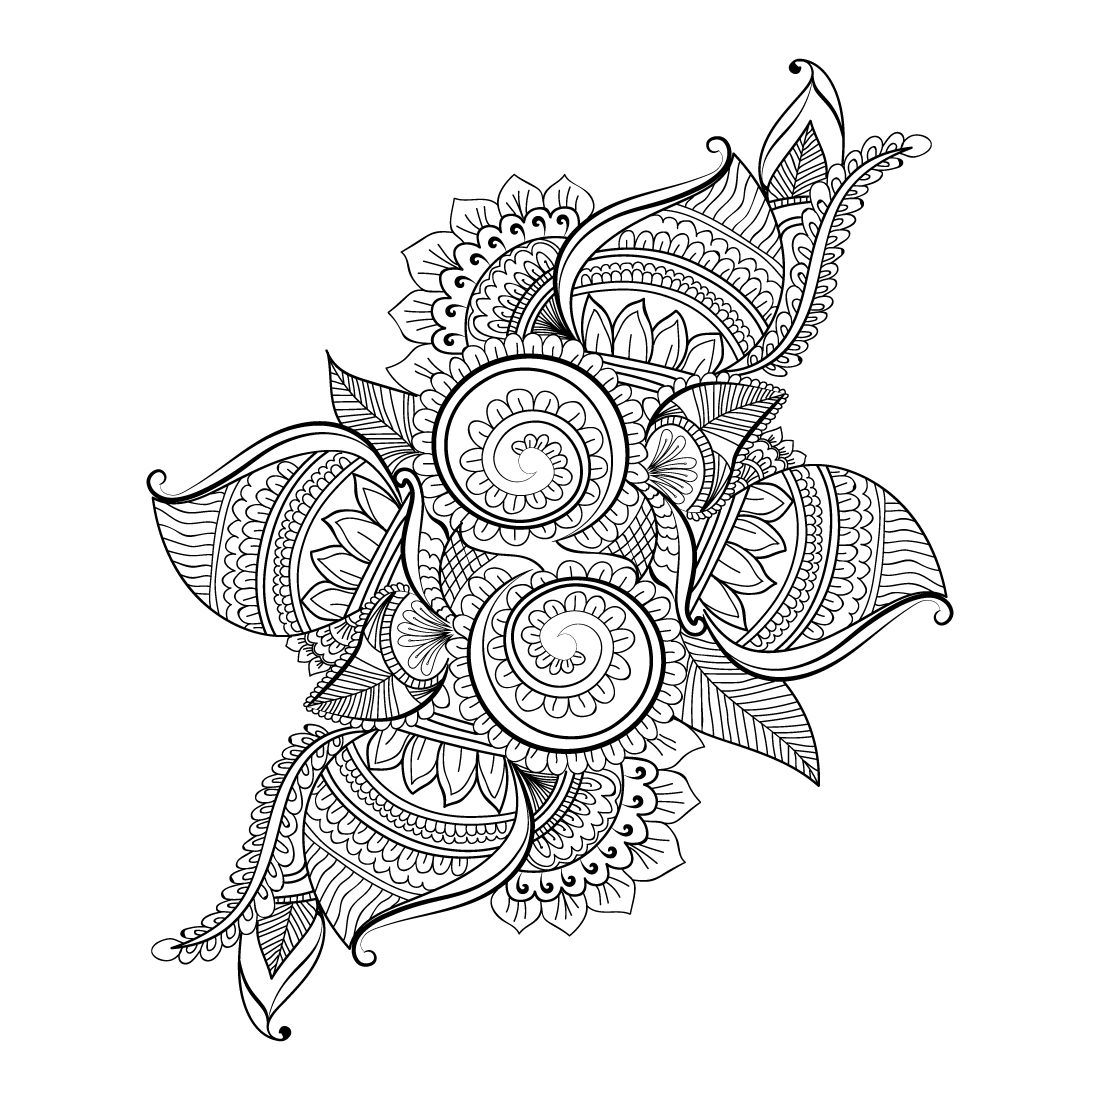 Amazon.com : Supperb® Temporary Tattoos - Black and White Floral Temporary  Tattoo, Vintage Flower Tattoos, Peony Temporary Tattoos, Large Tattoos :  Beauty & Personal Care